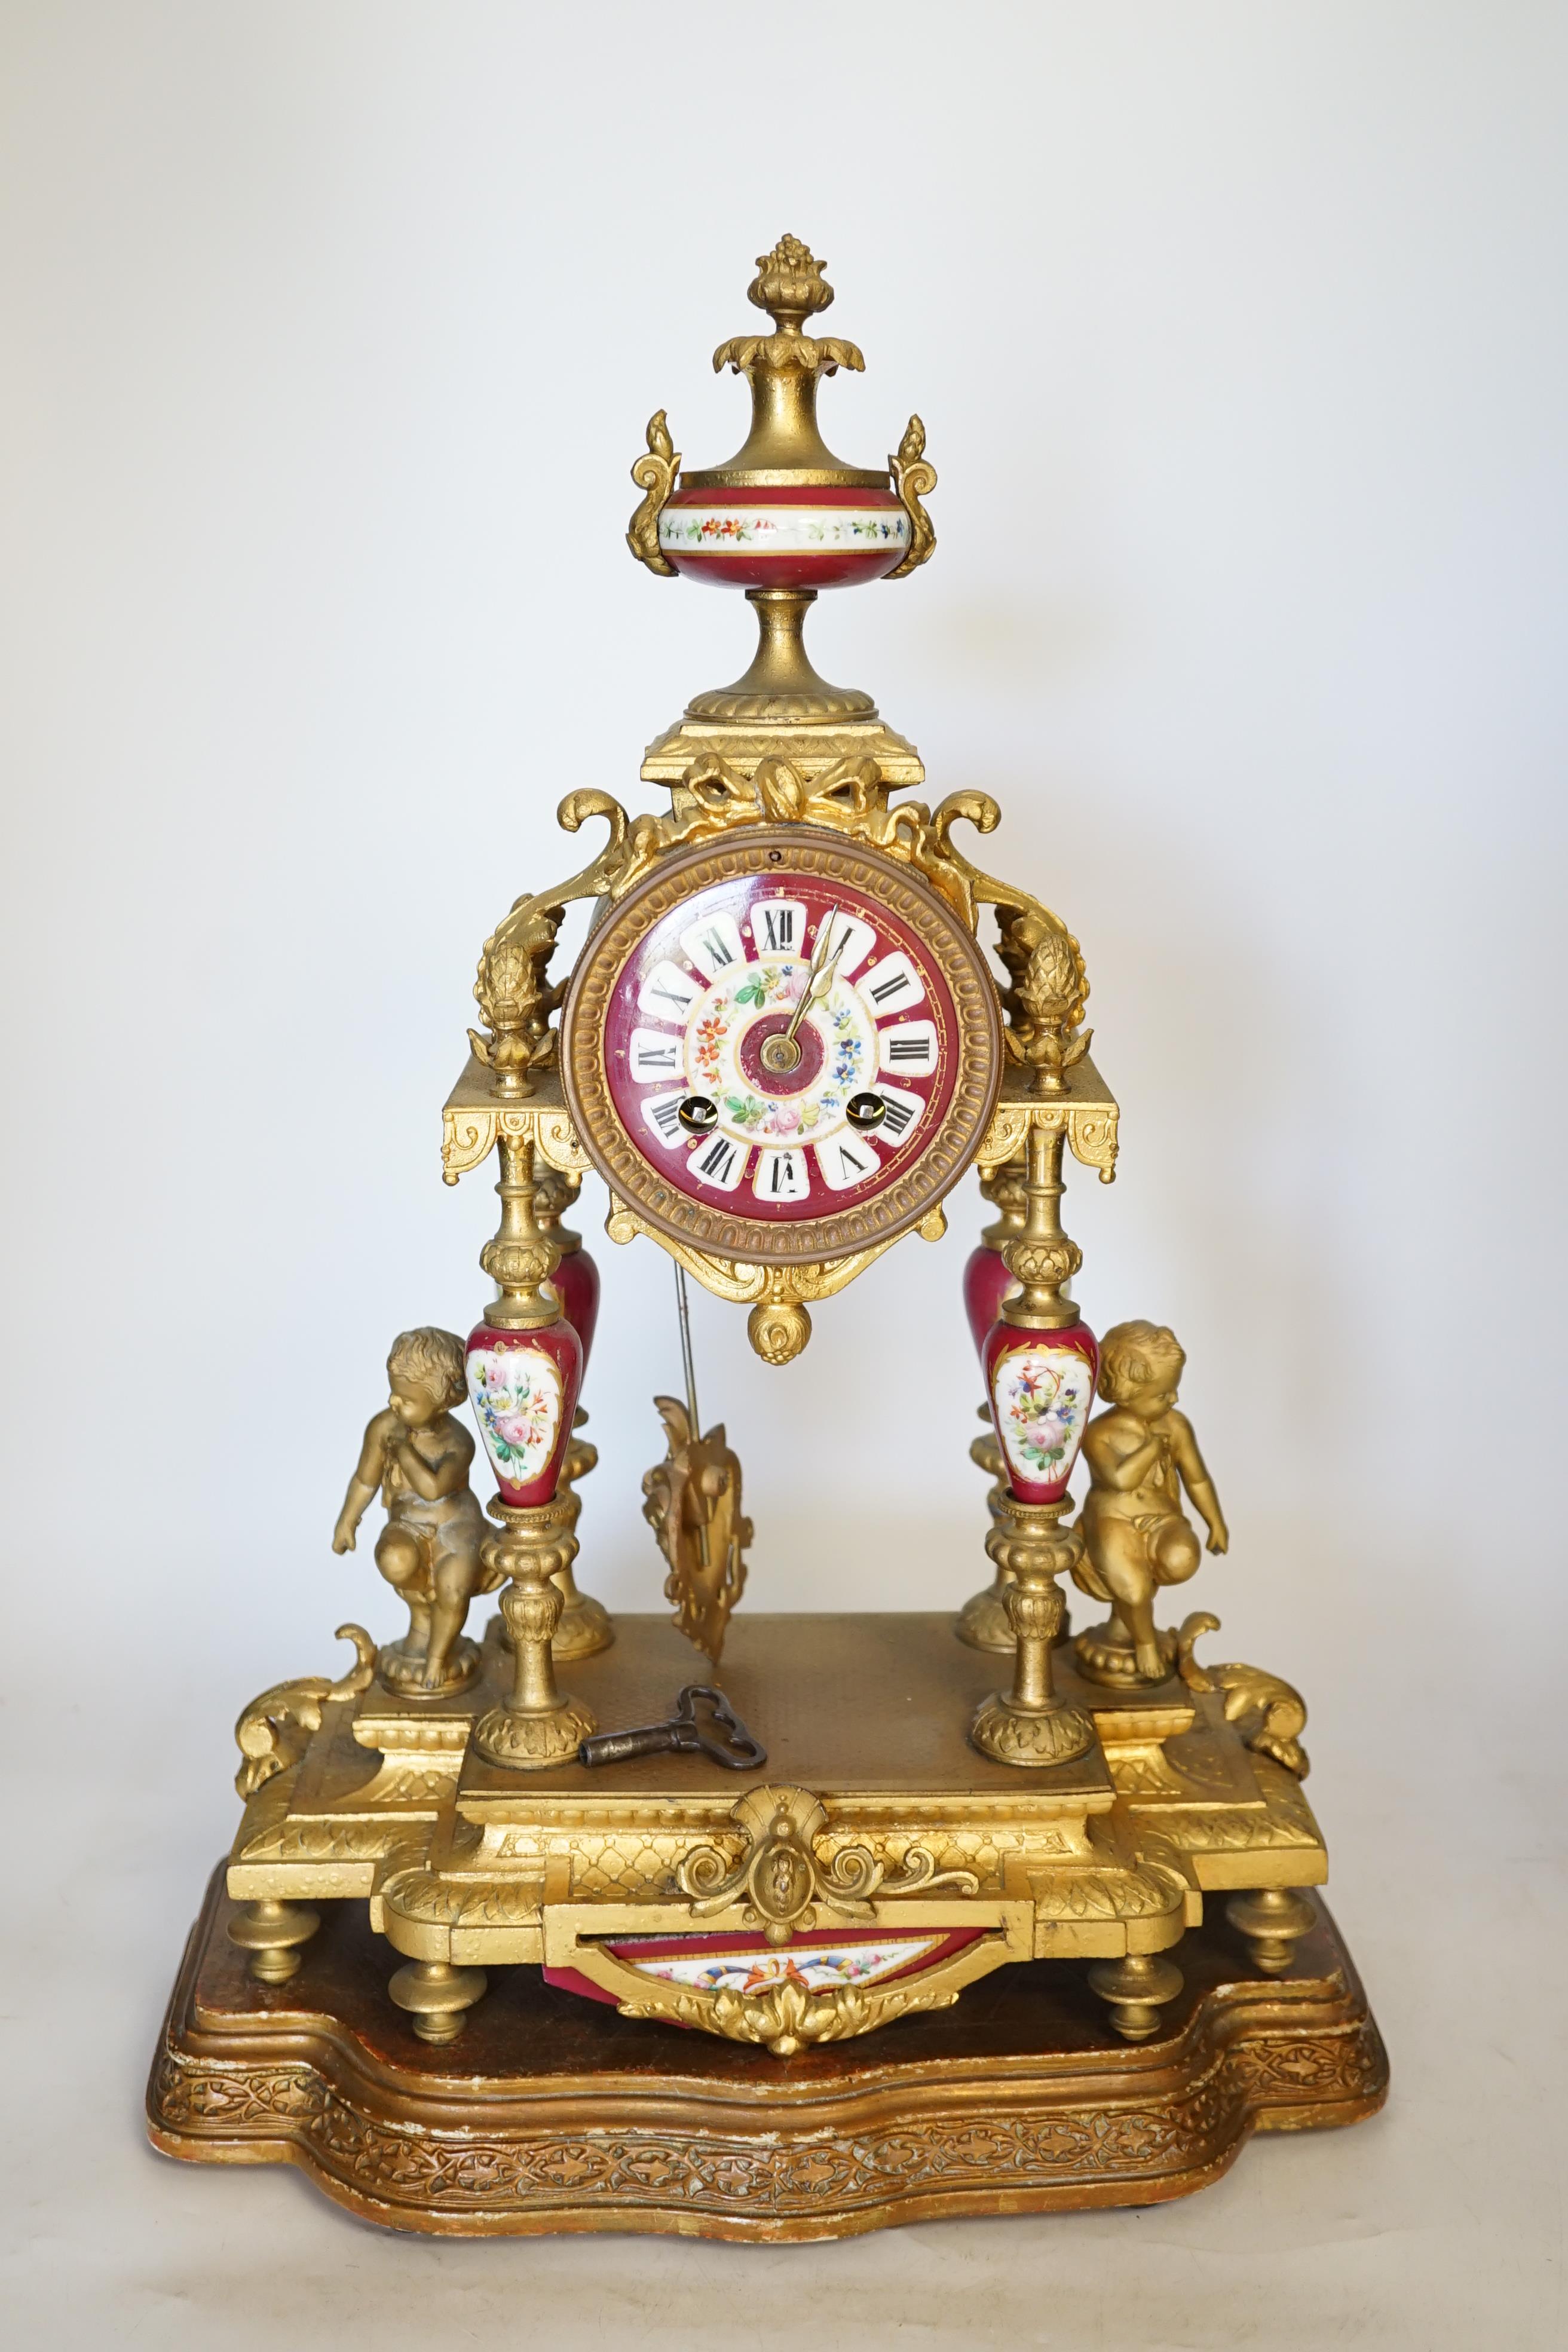 A late 19th century gilt metal and porcelain mounted mantel clock with associated stand, key and pendulum, 46cm. Condition - good to fair, not tested